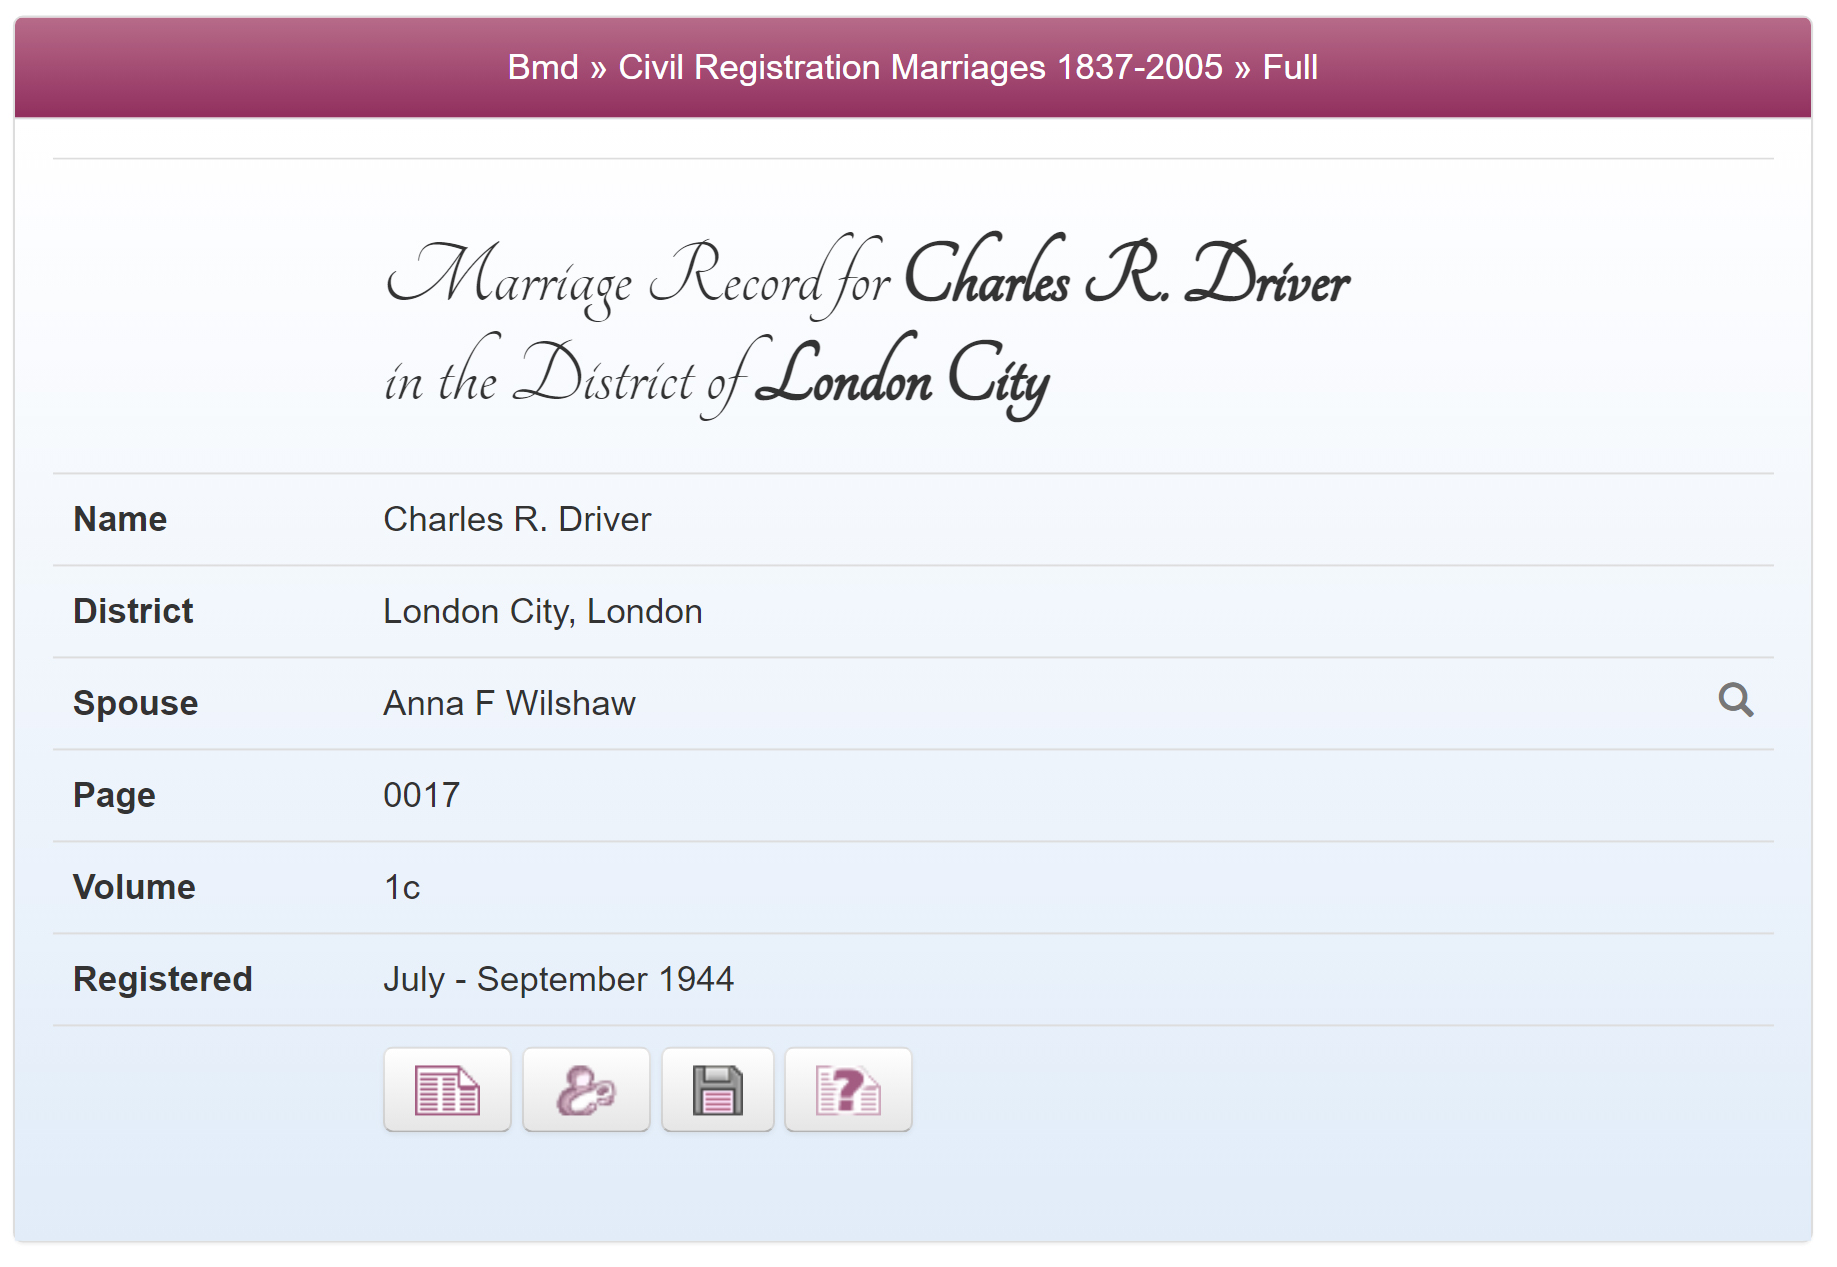 Ronnie and Anna's marriage record